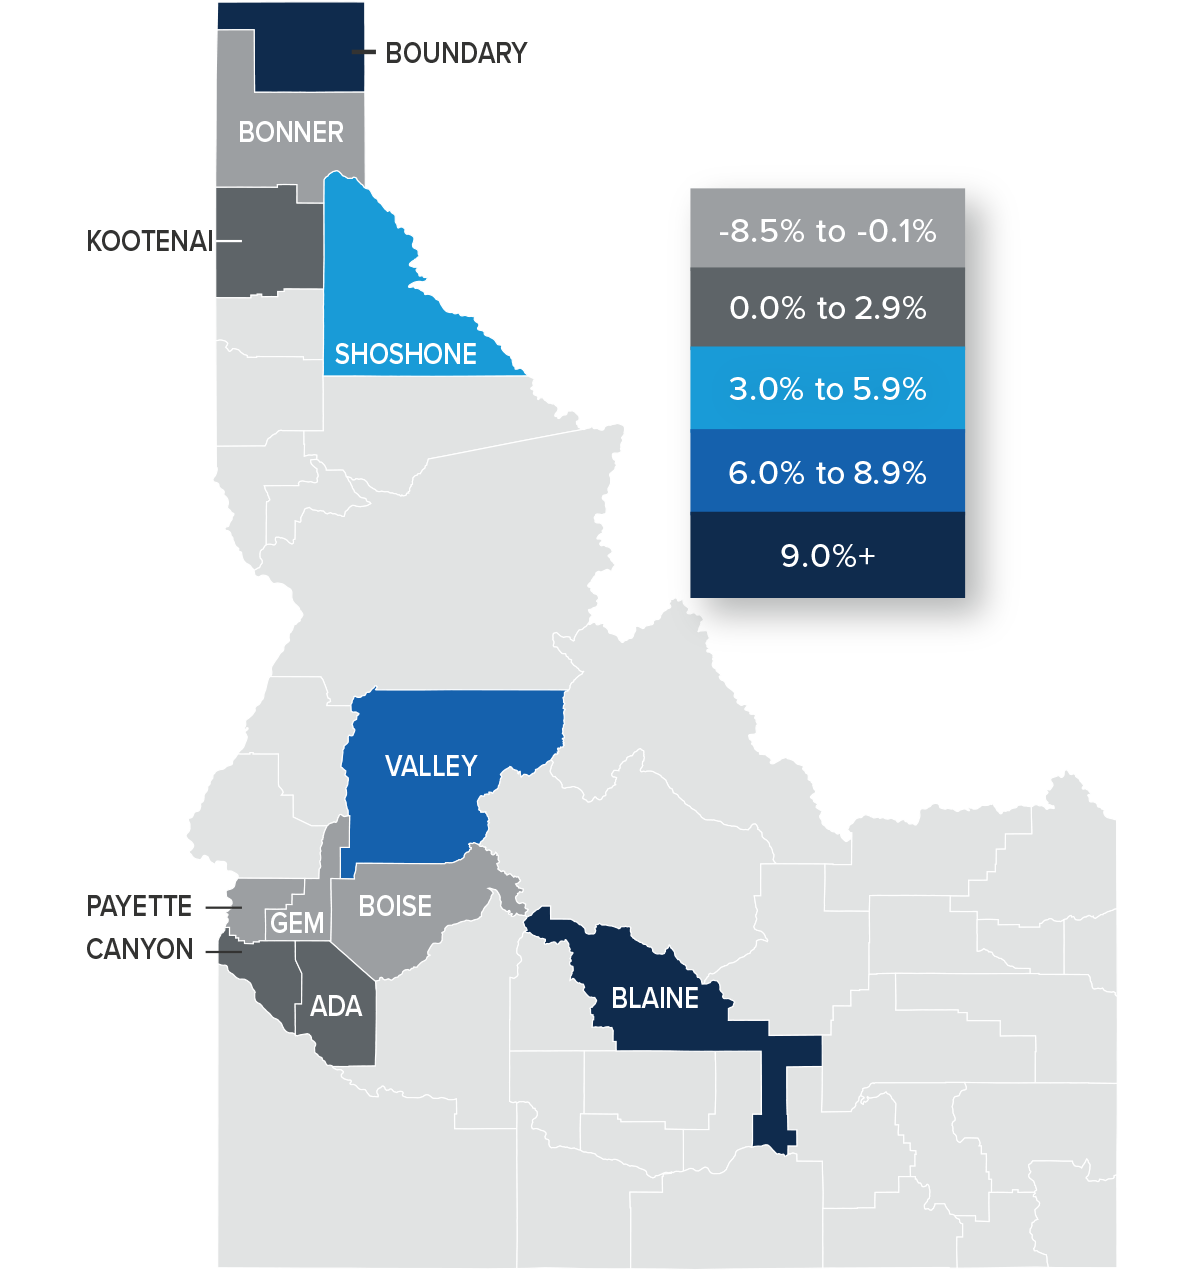 A map showing the real estate home prices percentage changes for various counties in Idaho. Different colors correspond to different tiers of percentage change. Bonner, Boise, Gem, and Payette have a percentage change in the -8.5% to -0.1% range, Kootenai, Ada, and Canyon are in the 0% to 2.9% change range, Shoshone is in the 3% to 5.9% range, Valley is in the 6% to 8.9% change range, and Blaine is in the 9%+ range.